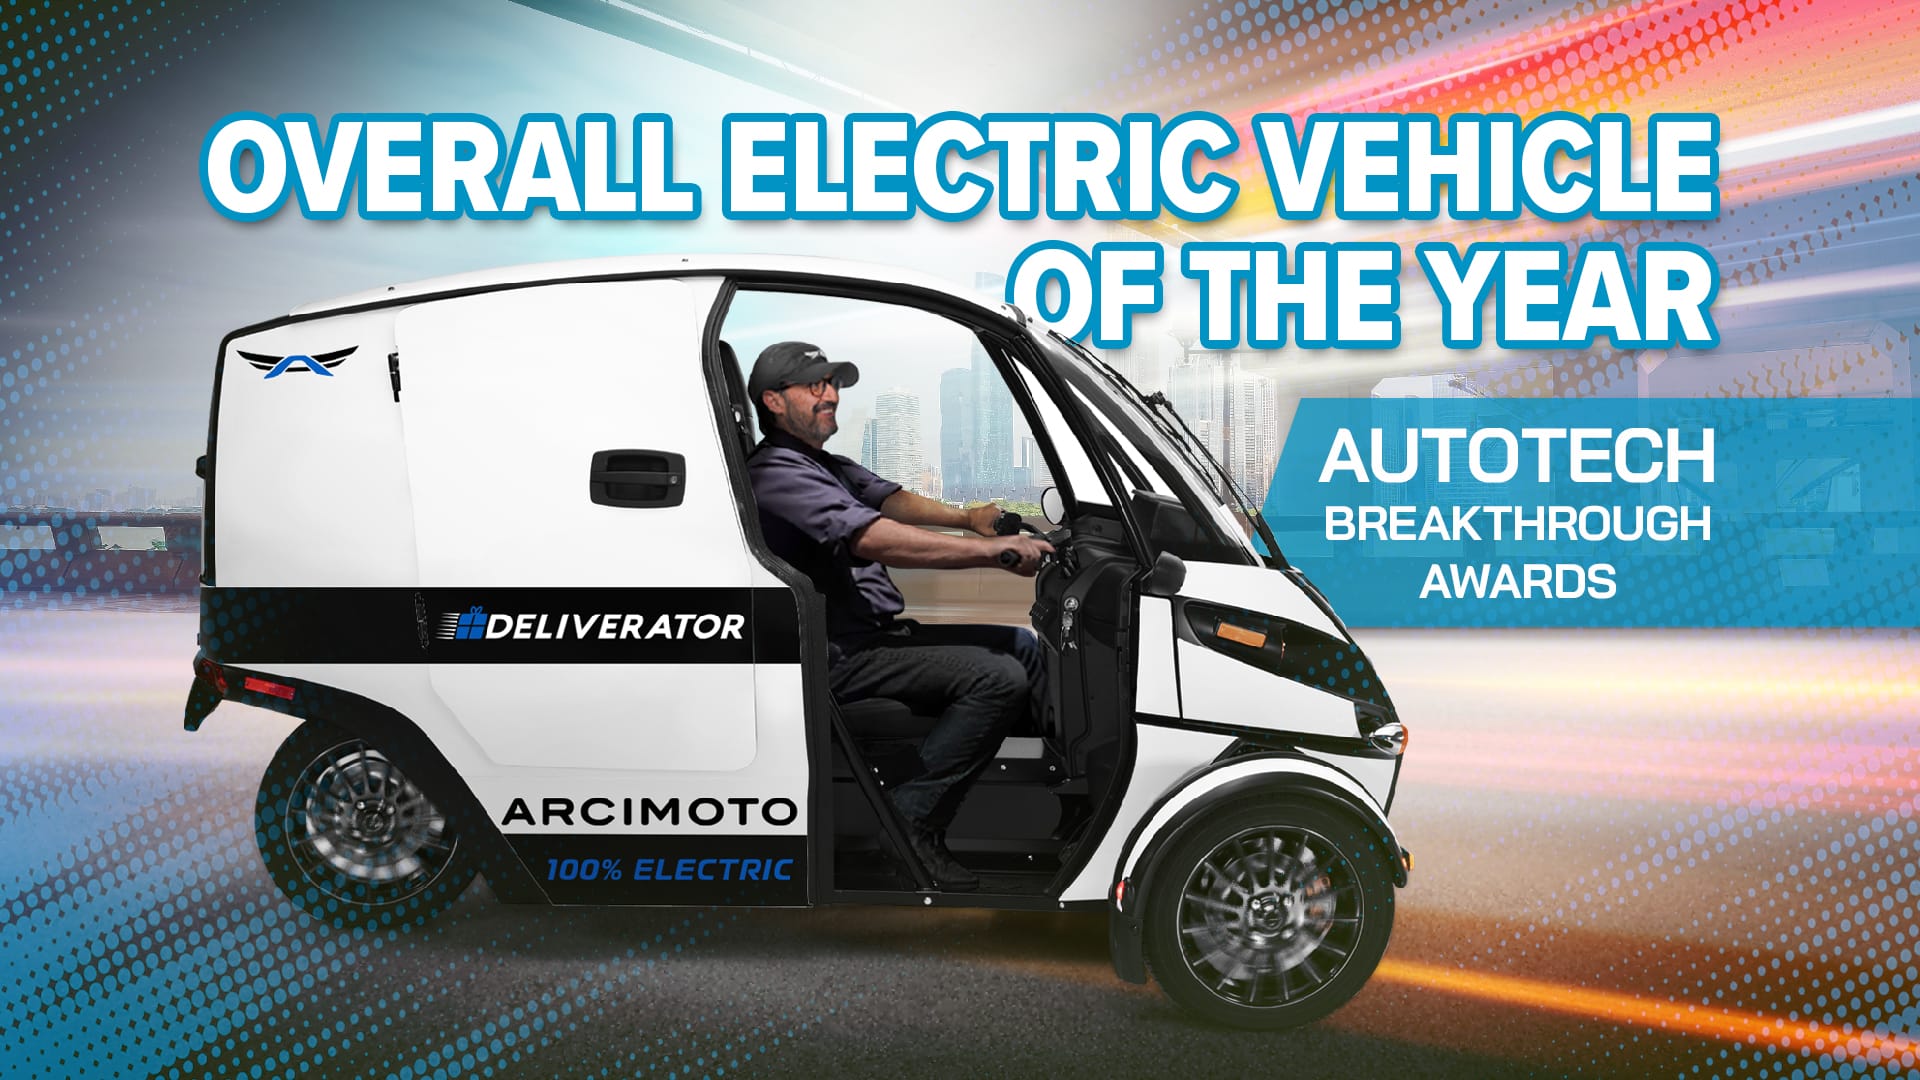 Arcimoto Deliverator Named Overall Electric Vehicle of the Year in 2022